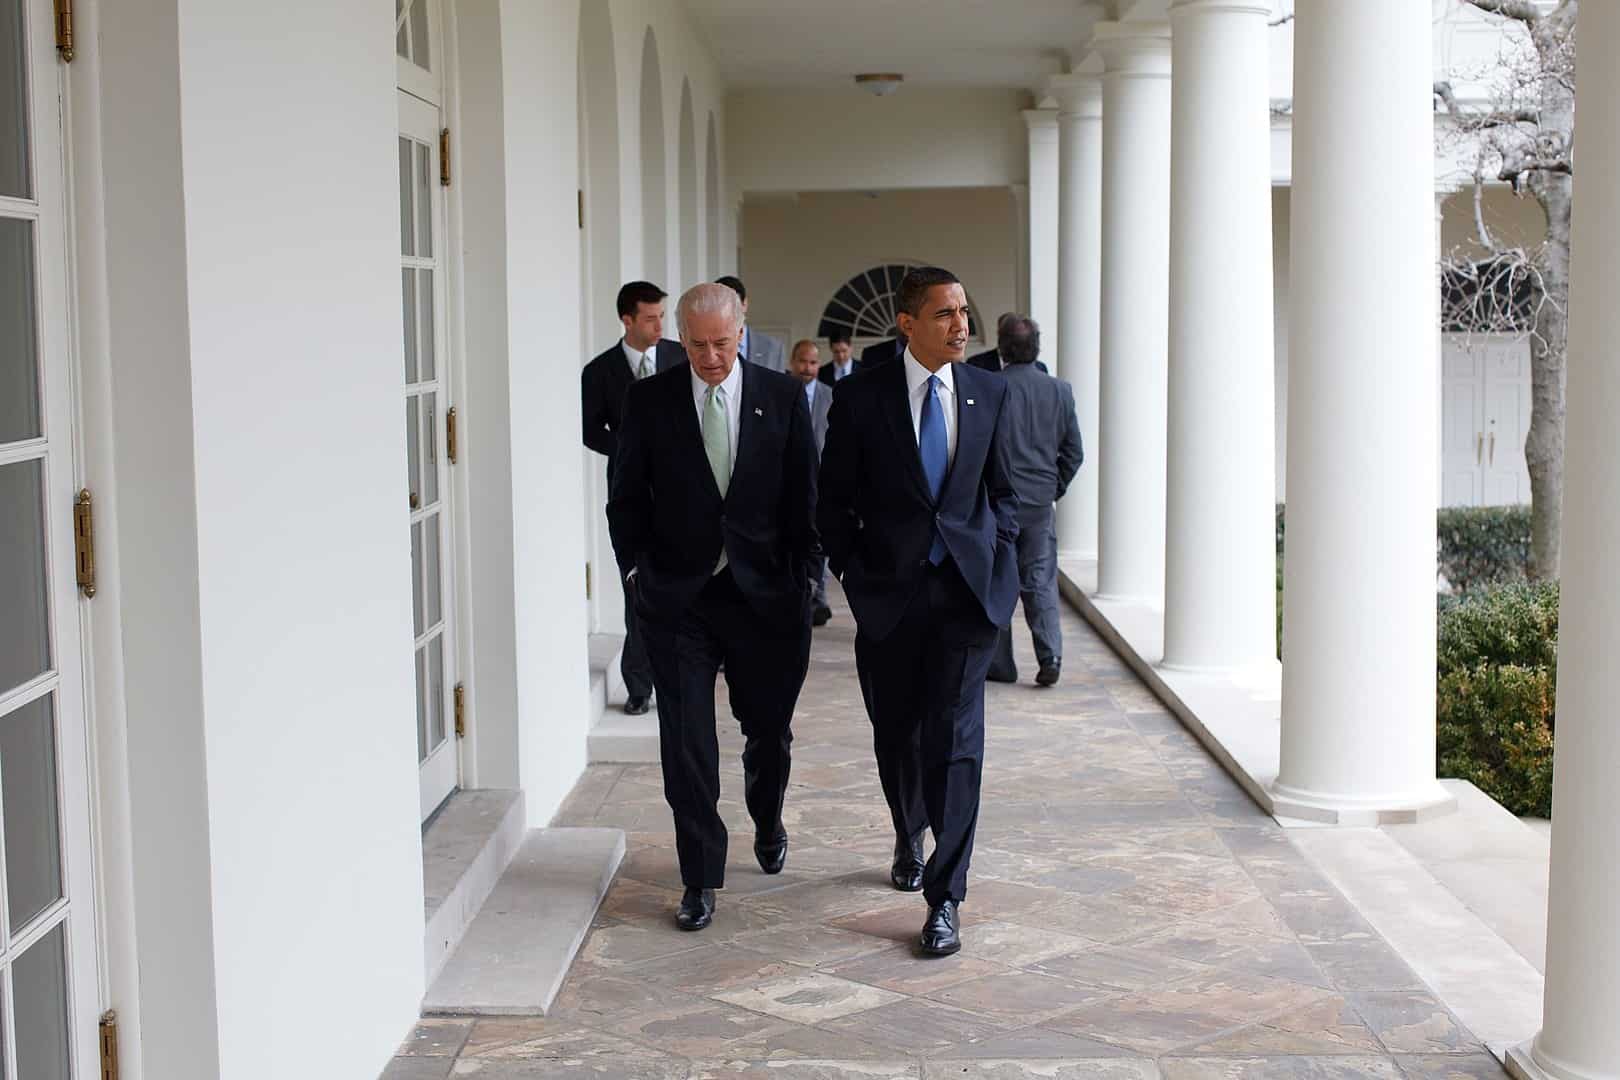 Obama and Biden walking together in the White House in 2009.